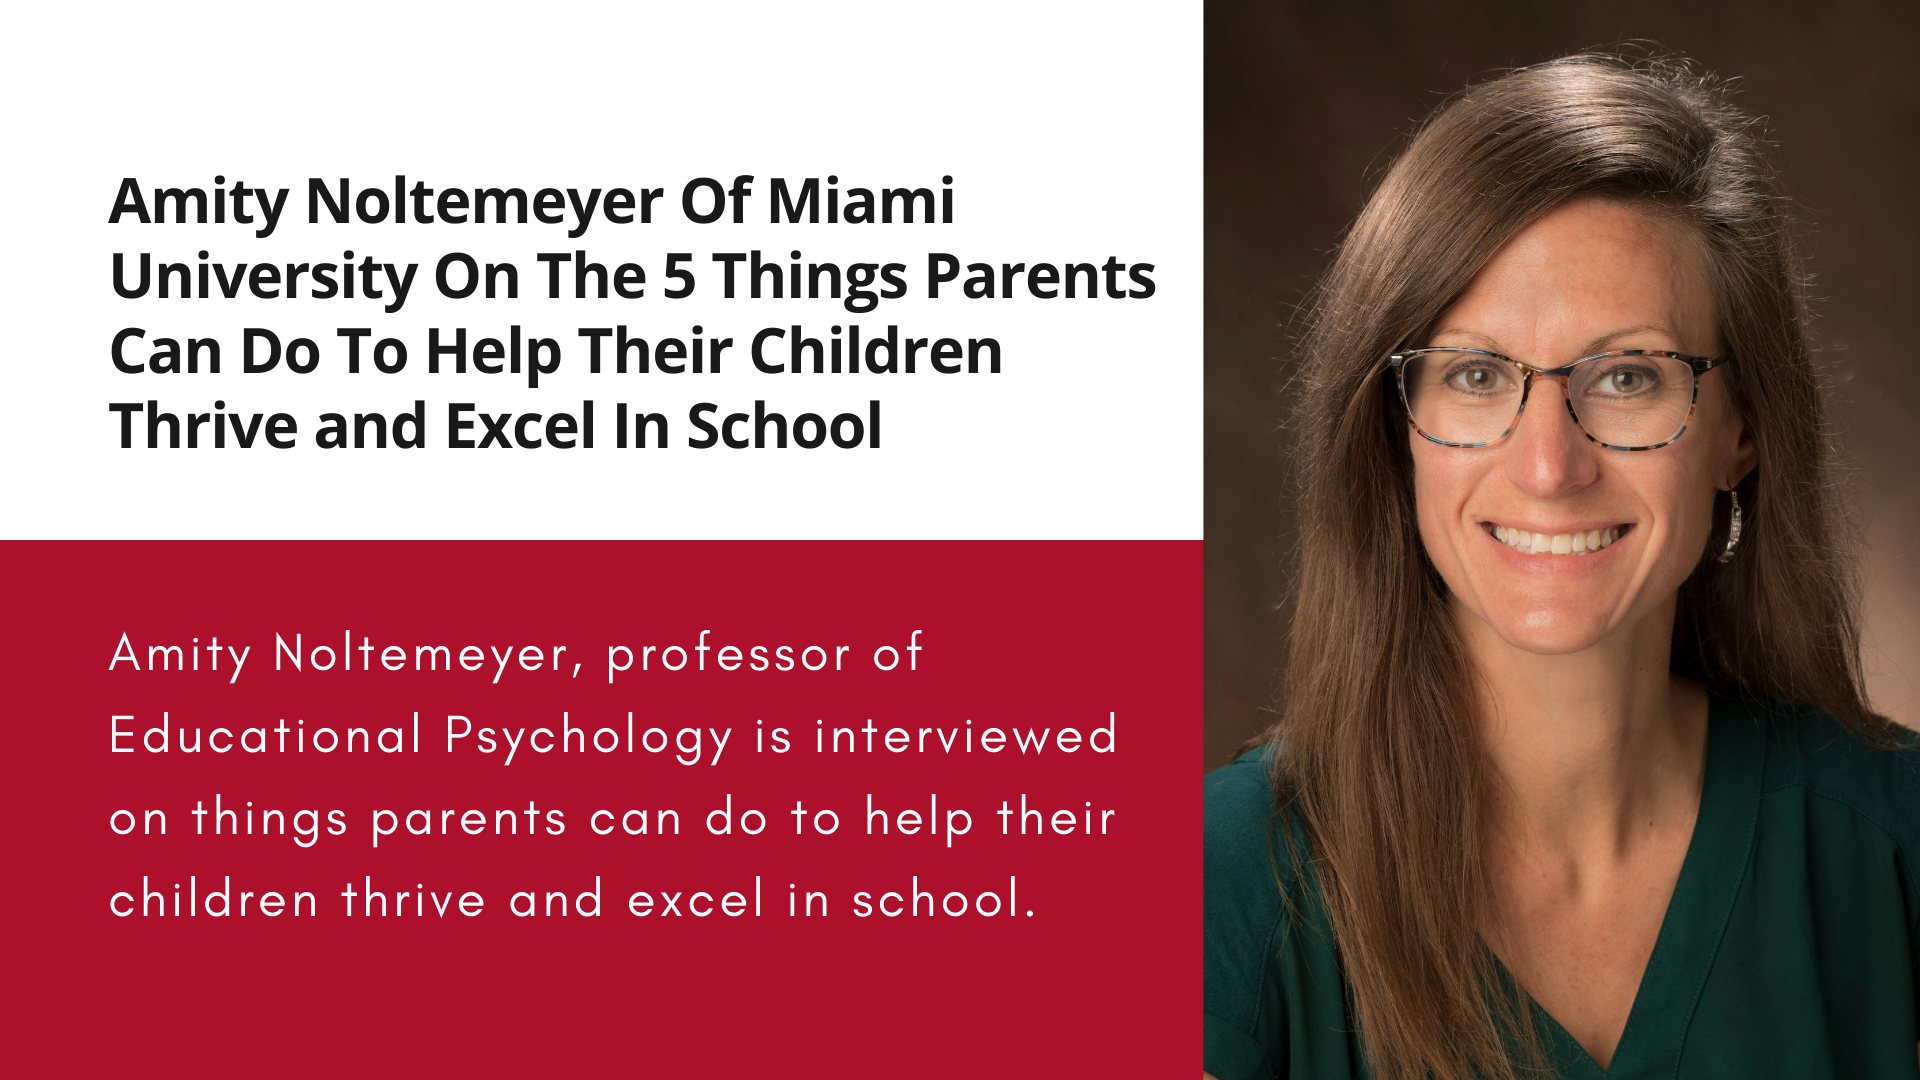 Amity Noltemeyer, professor of Educational Psychology is interviewed on things parents can do to help their children thrive and excel in school.